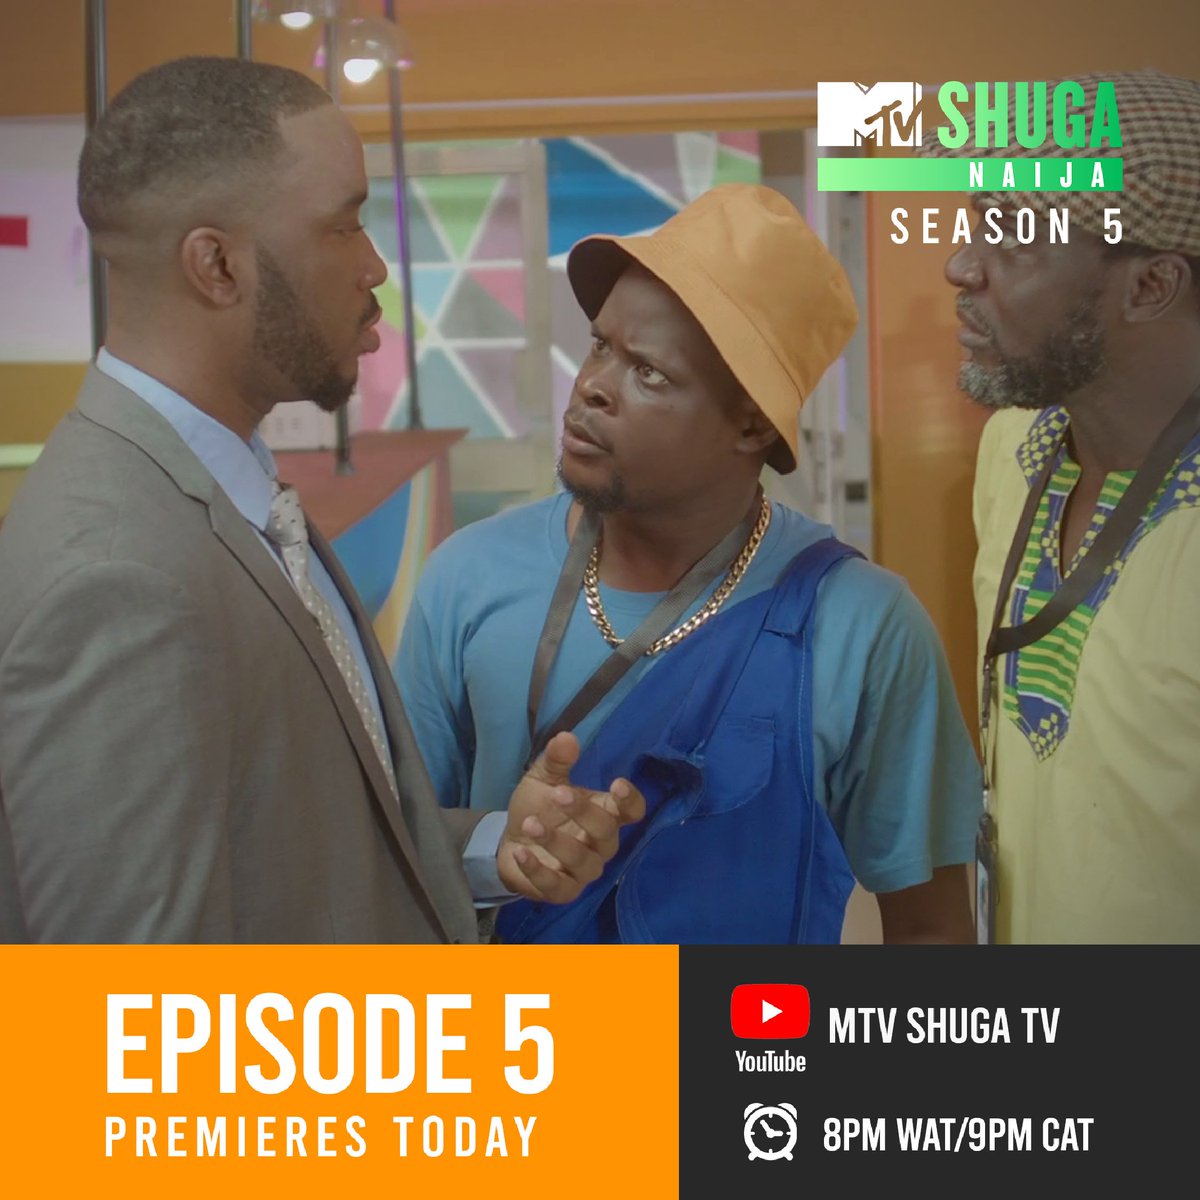 I am happy and grateful to God that the Characters of Praise and Haleel @Maggie_Osuome are getting the Shuga fam to have difficult conversations that aren't usually easy to have. Tonight's Episode promises to leave us all in deep clarity of things.
#mtvshuganaija5
#PraiseXHaleel